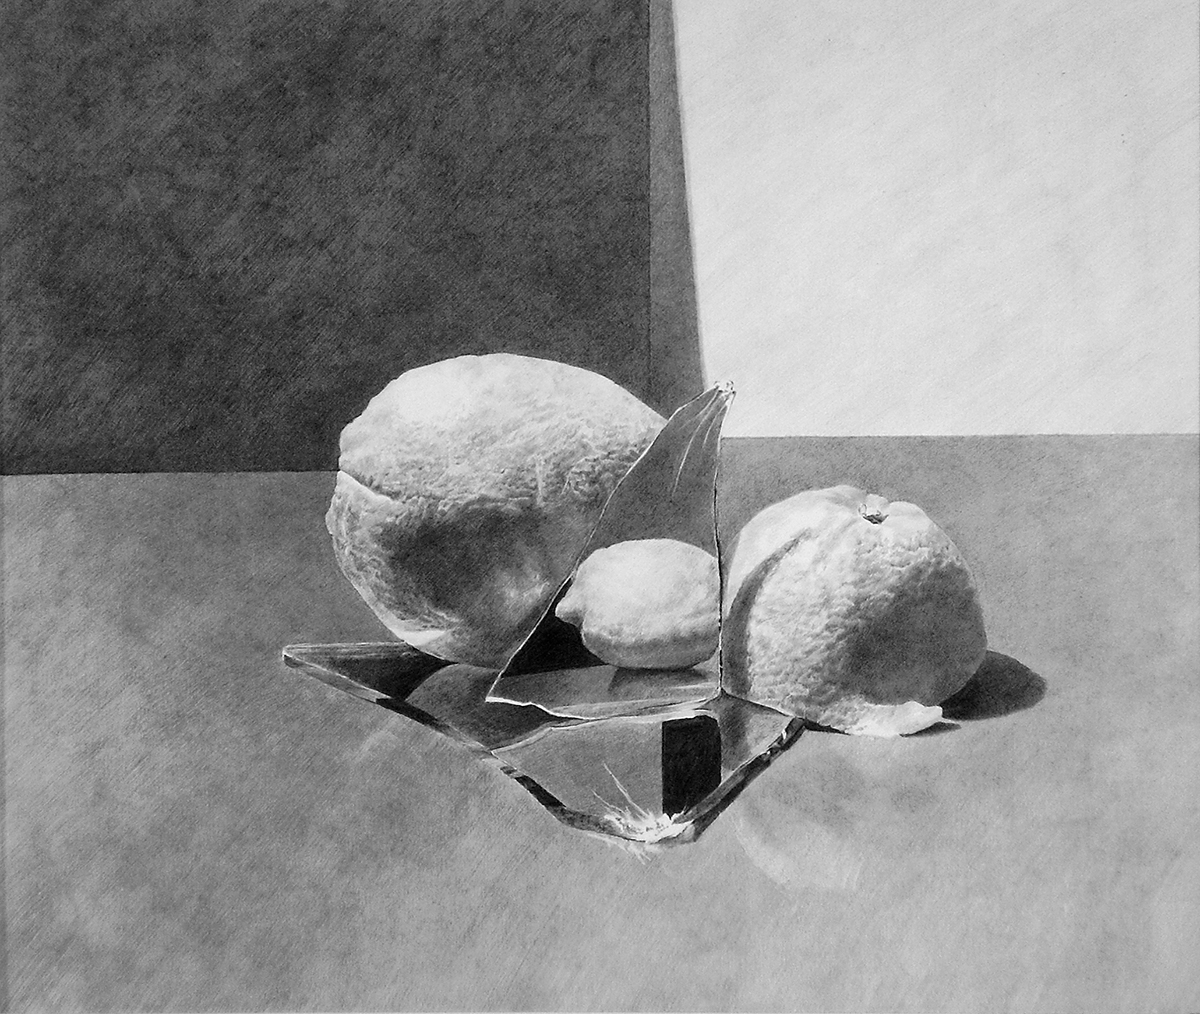  Loneliness - Oranges with Lemon, graphite 0.3-0.7 on paper, 344mm x 287mm, 2009 - SOLD 